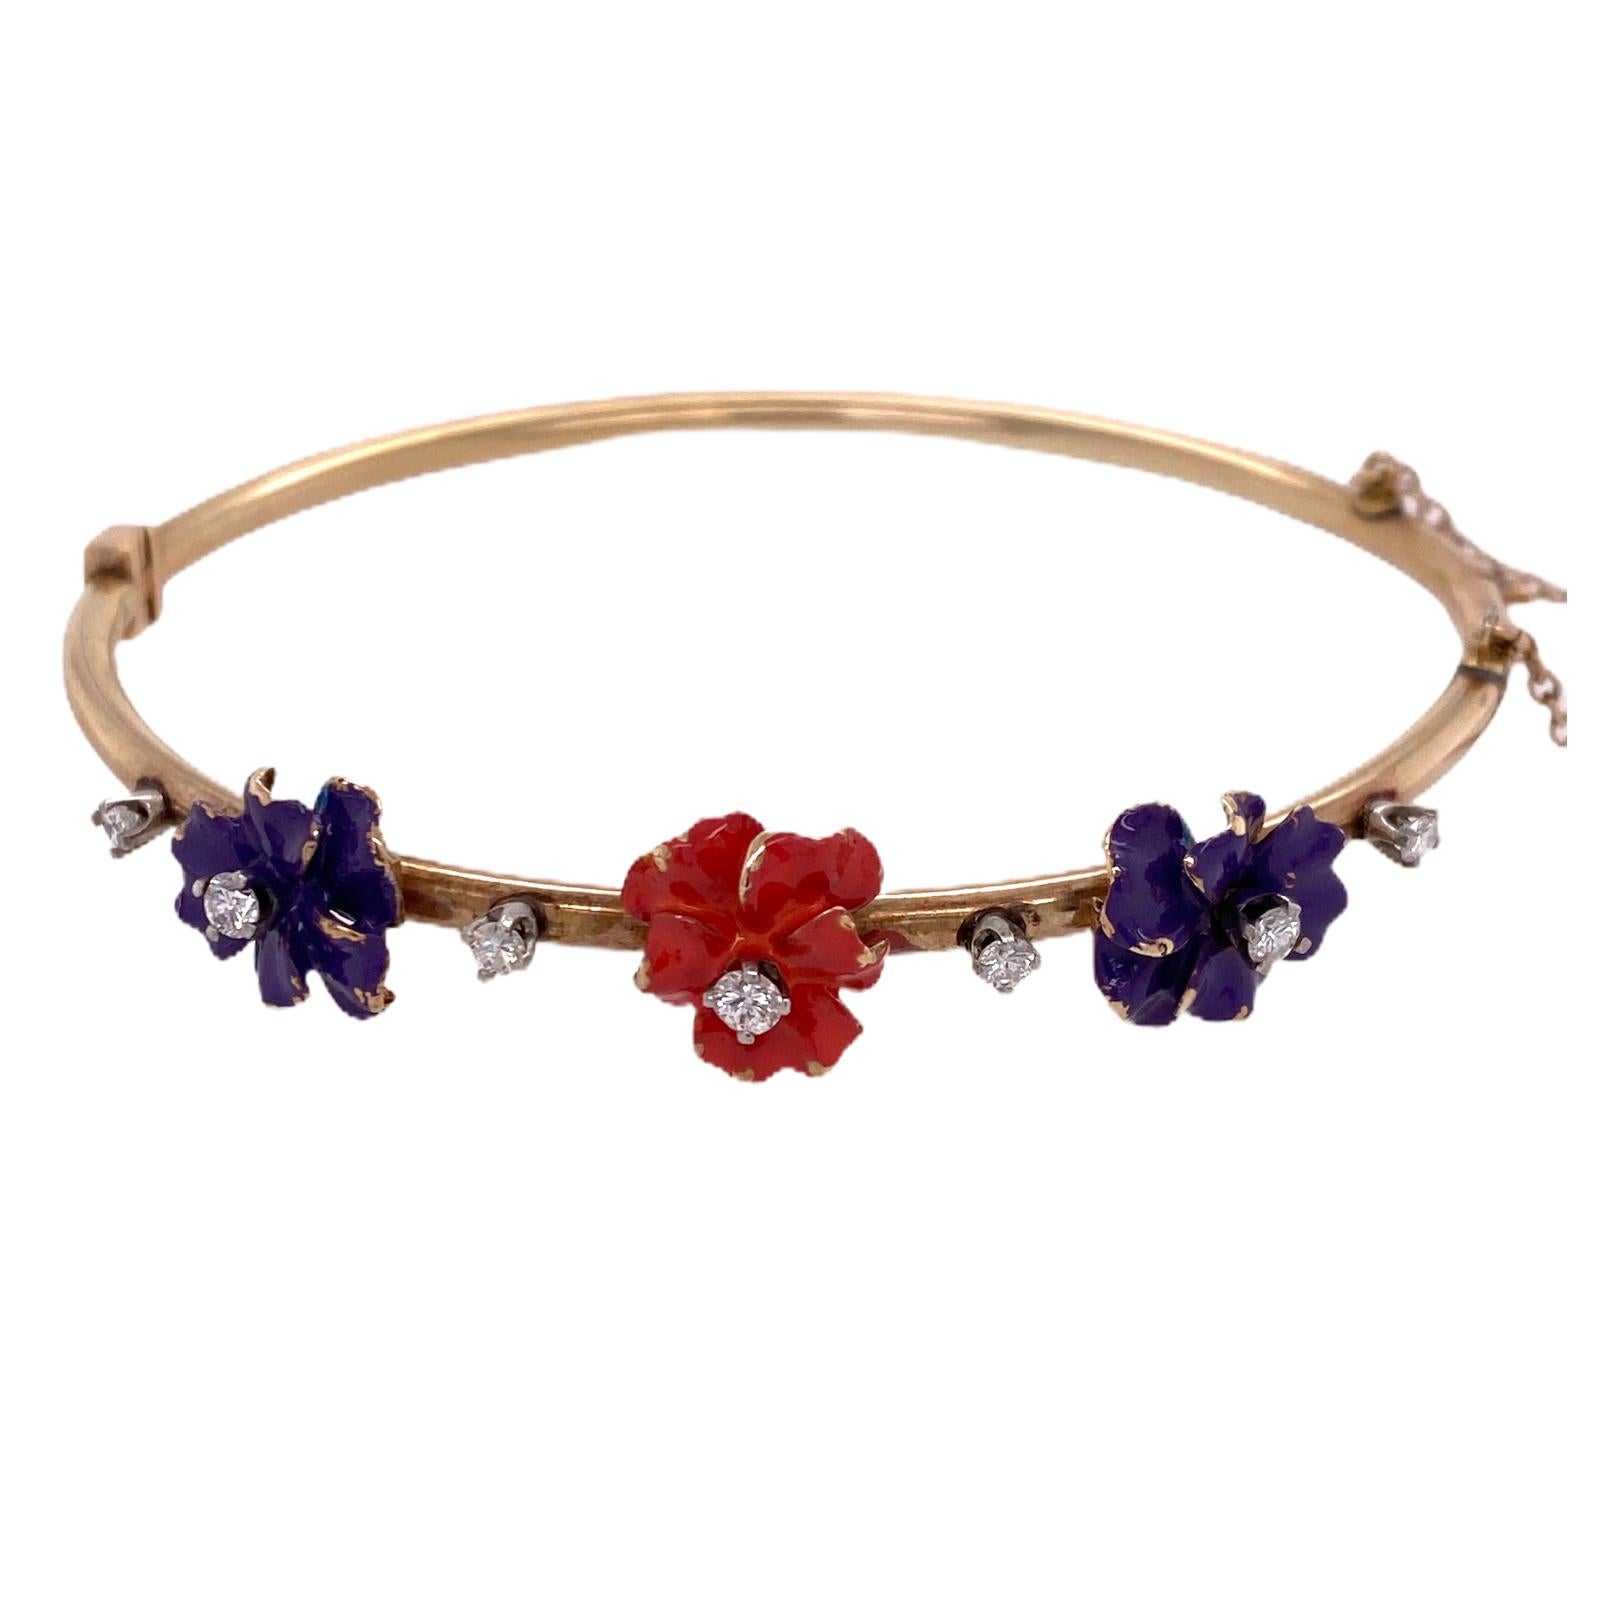 Feminine and beautifully hand crafted enamel floral diamond bangle bracelet fashioned in 14 karat yellow gold. This vintage bangle features pink and purple enamel flowers set and surrounded by 7 round brilliant cut diamonds weighing .30 carat total